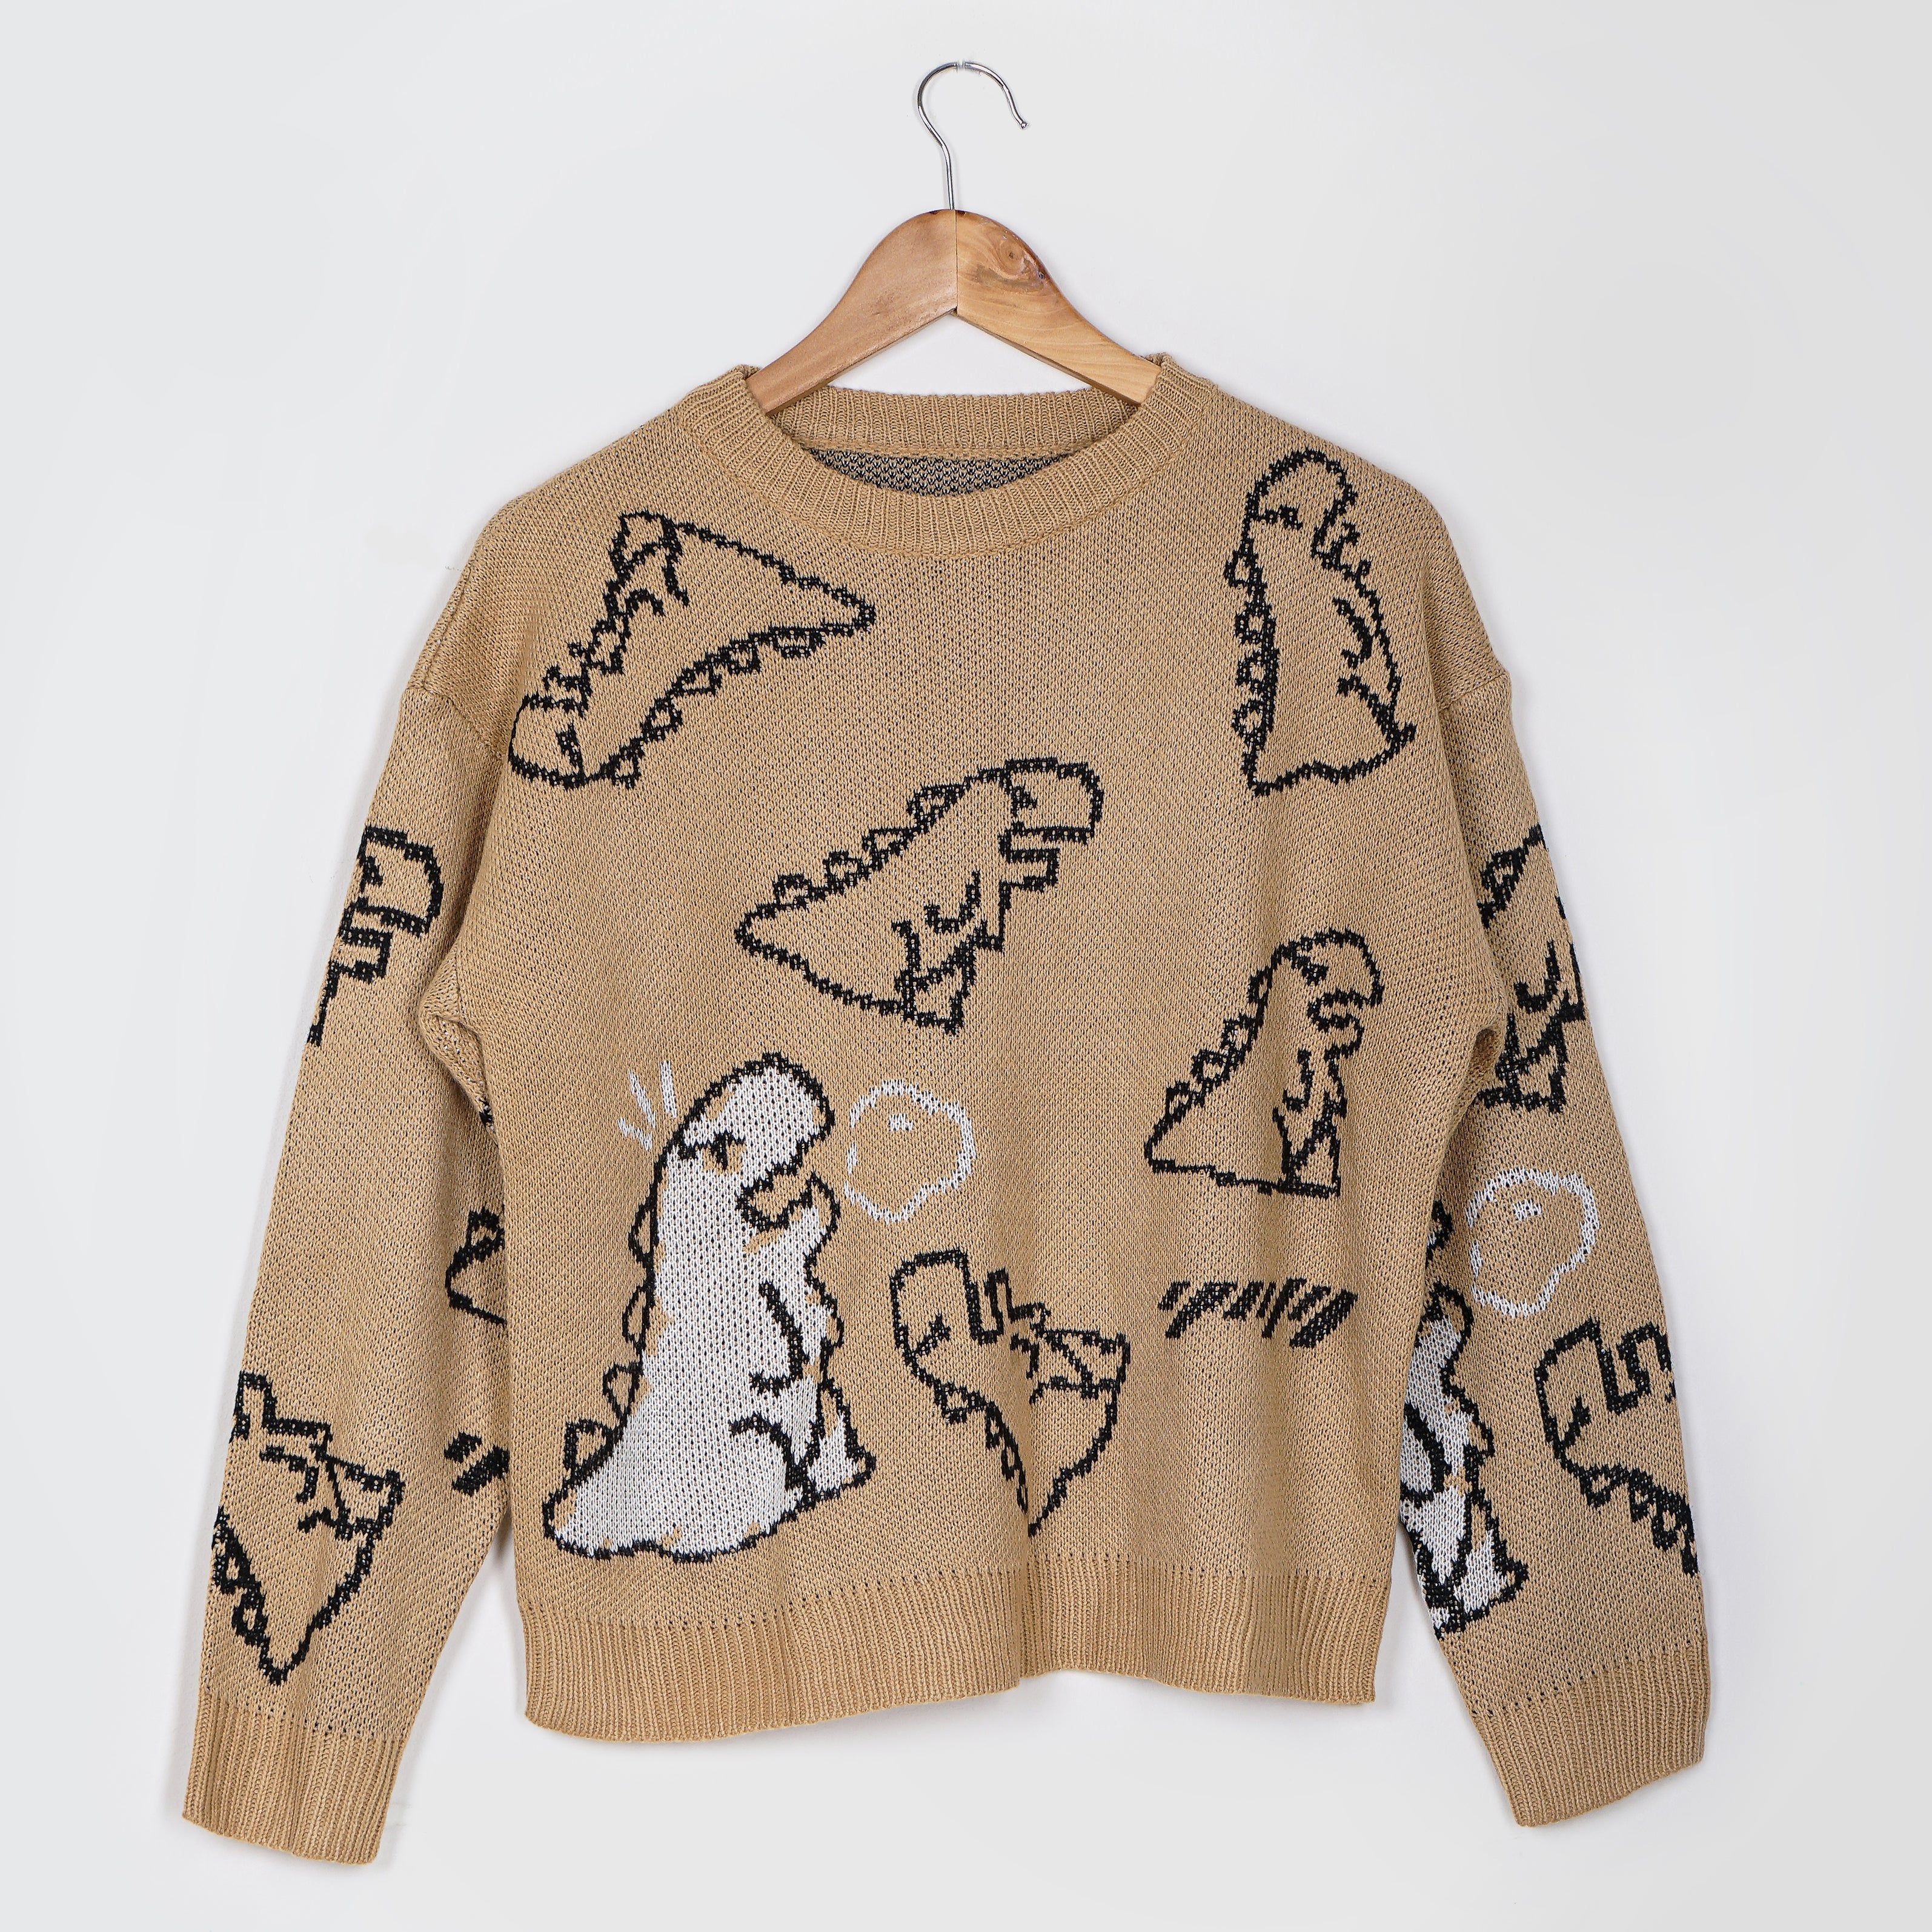 Long-Sleeved Knitted Sweater Graphic Print - Marca Deals - Shein